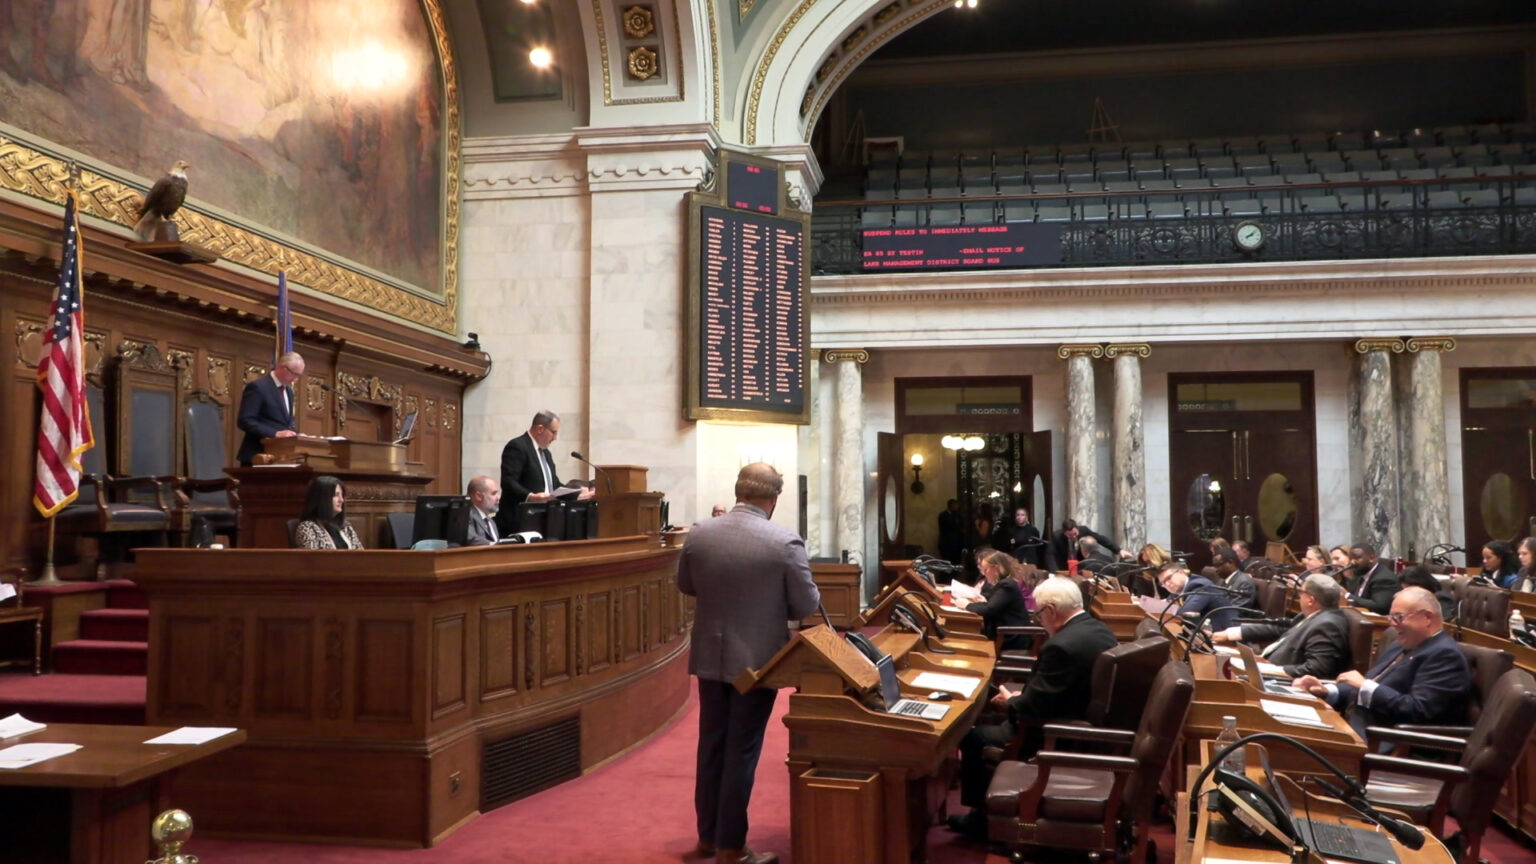 Lawmakers sit and stand in multiple rows of desks and a legislative dais in a room with marble pillars and masonry, a second-story seating gallery, the U.S. and Wisconsin flags, a taxidermy bald eagle, a large painting and a digital vote register.